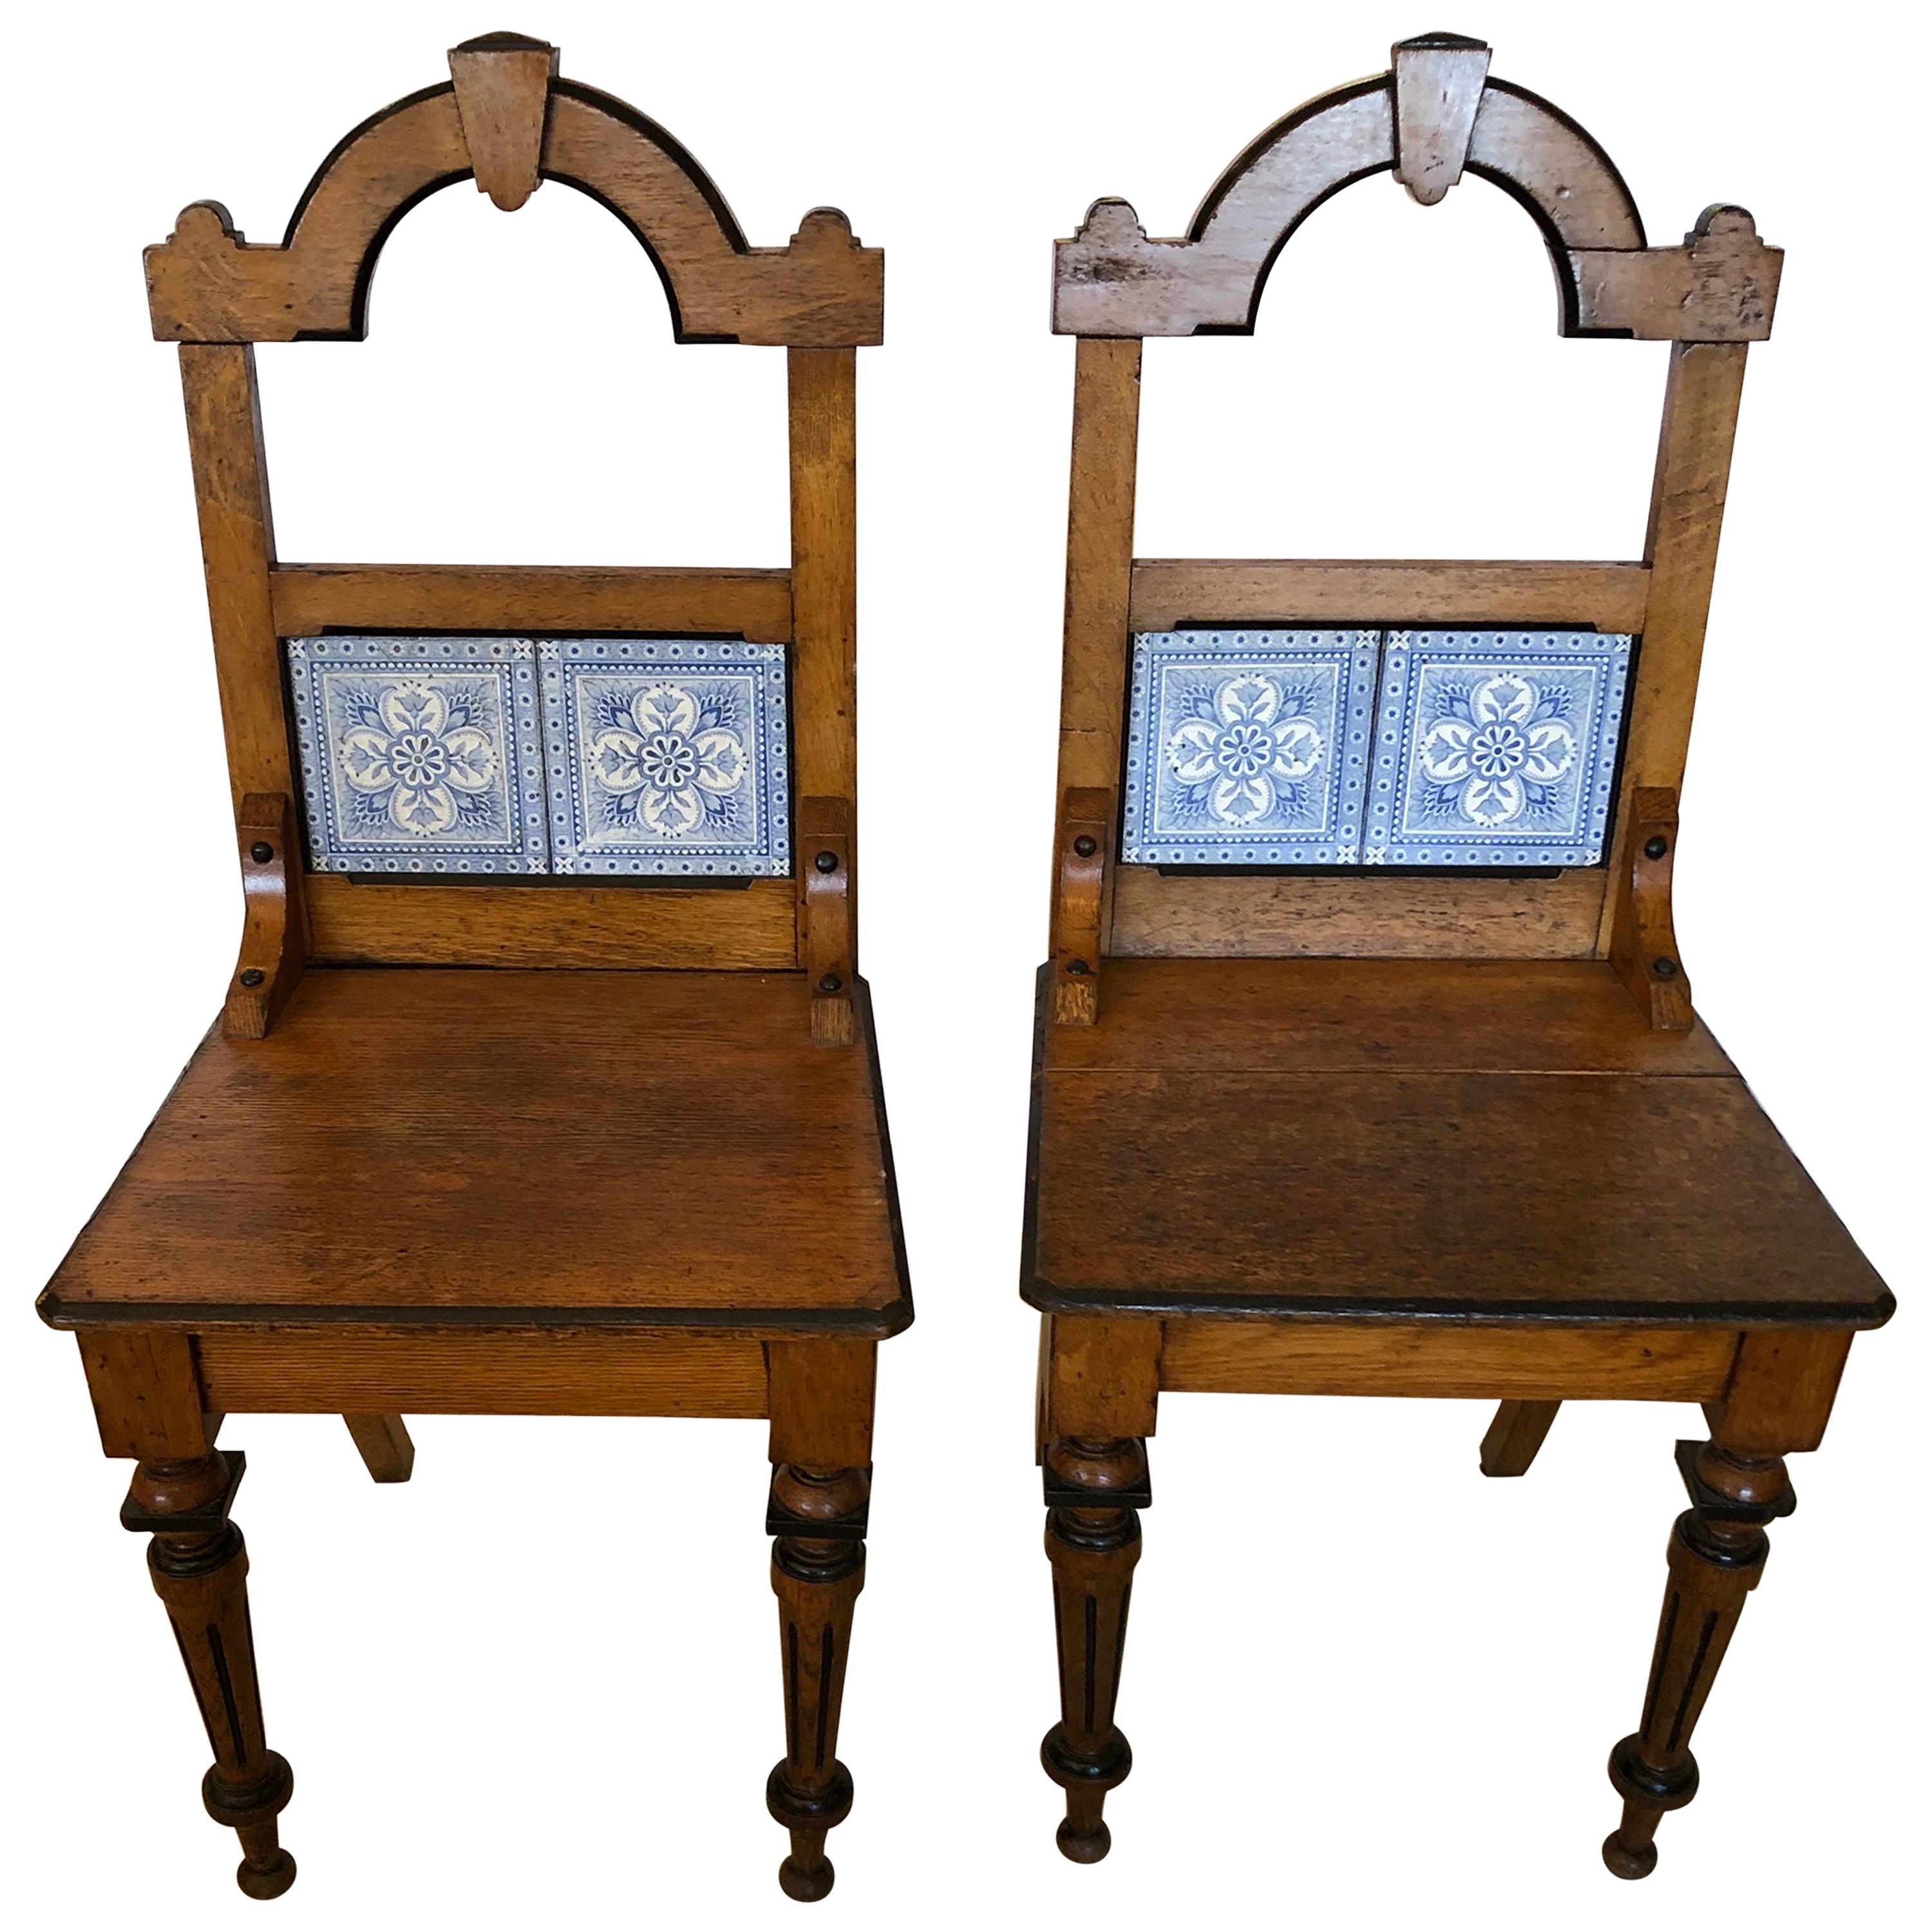 Enchanting Rare Pair of French Oak and Tile Arts & Crafts Side Chairs